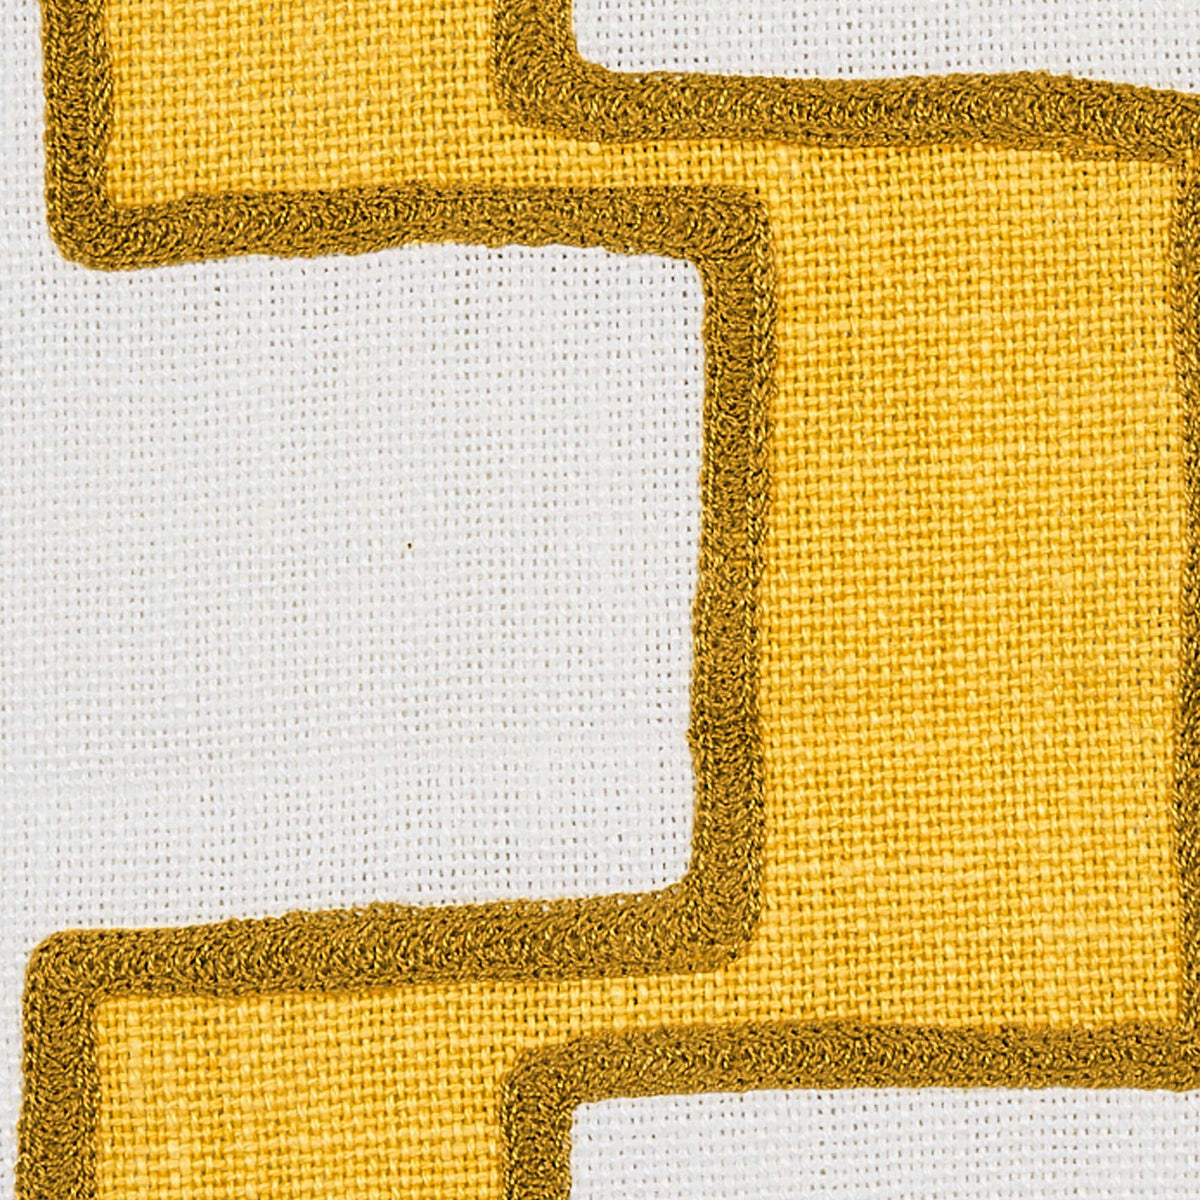 Dixon Embroidered Yellow / 4x4 inch Fabric Swatch